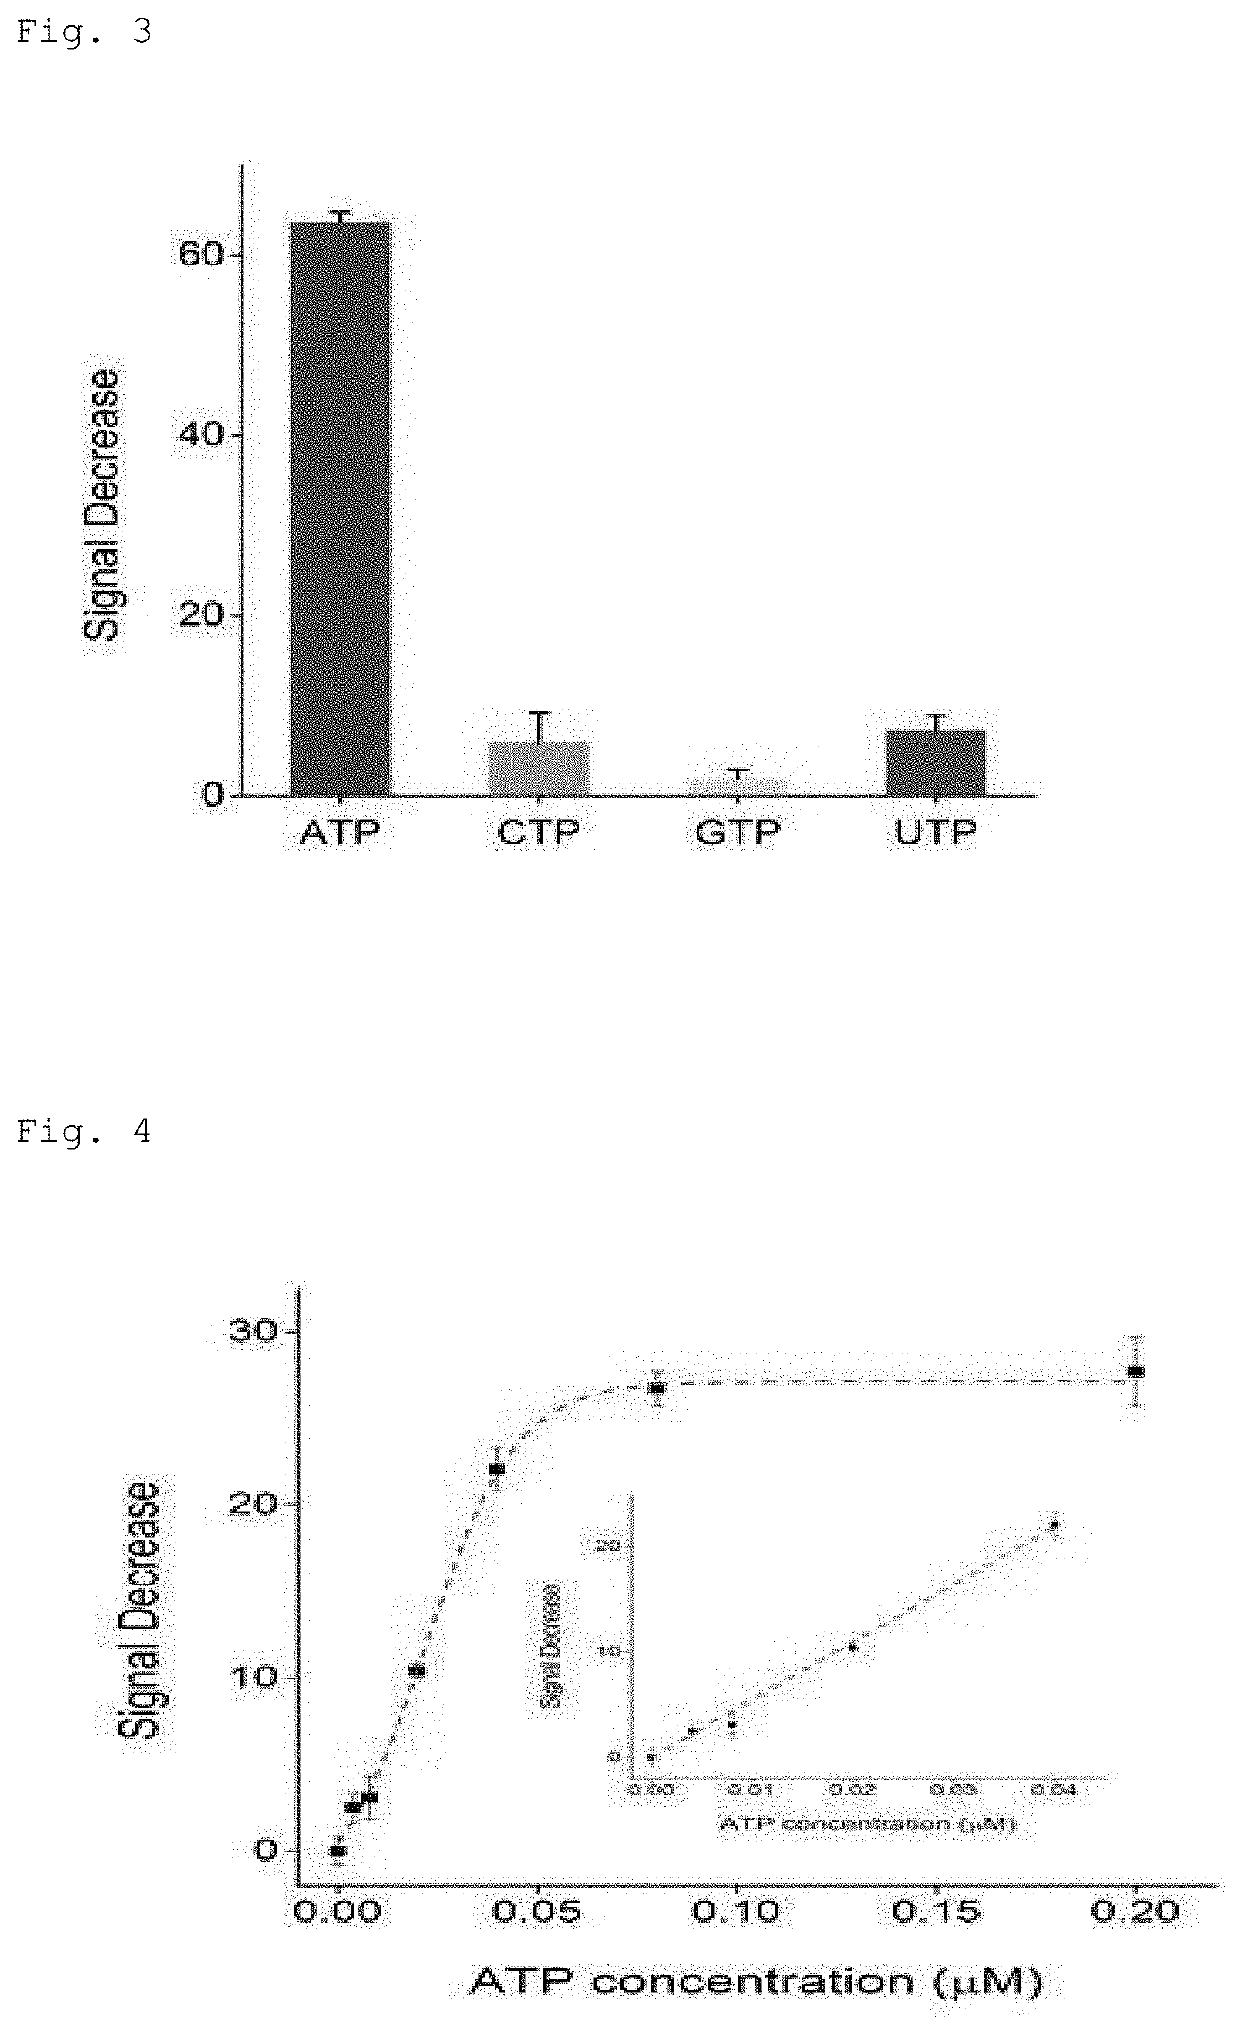 Method for detecting atp by using personal blood glucose meter